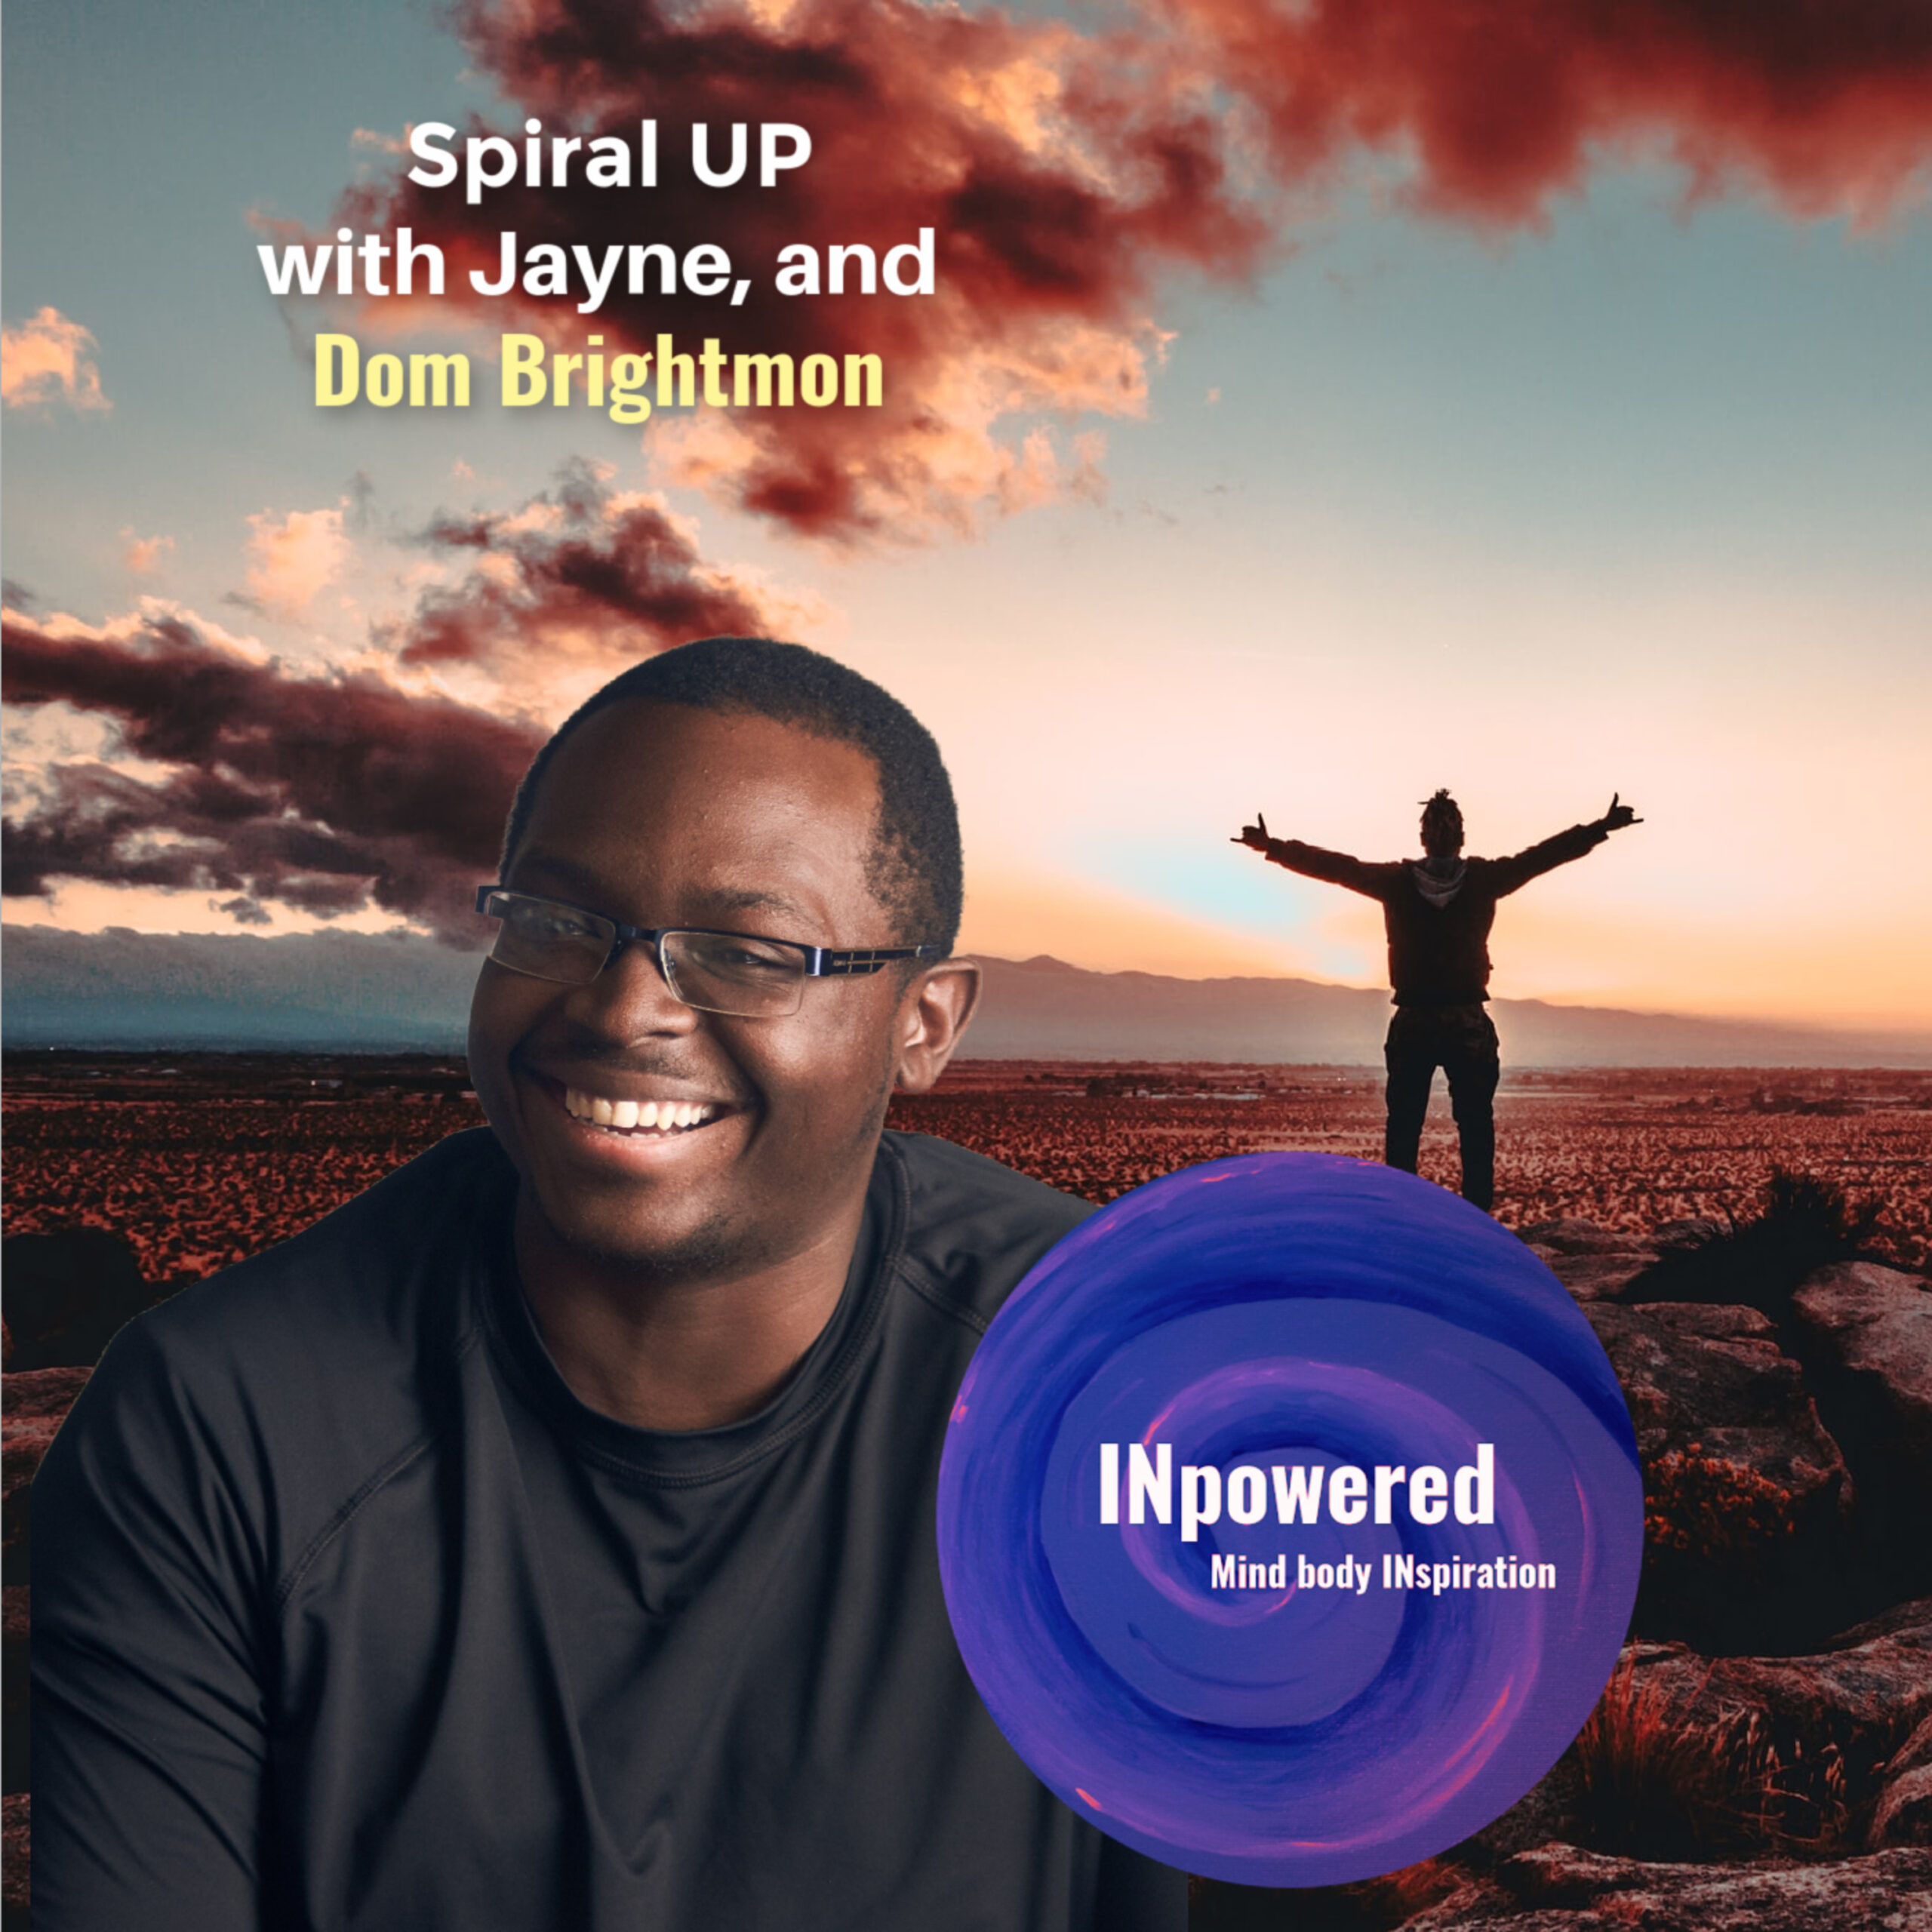 Dom Brightmon – author of “From Crappy to Happy” Sacred Stories of Transformational Joy.